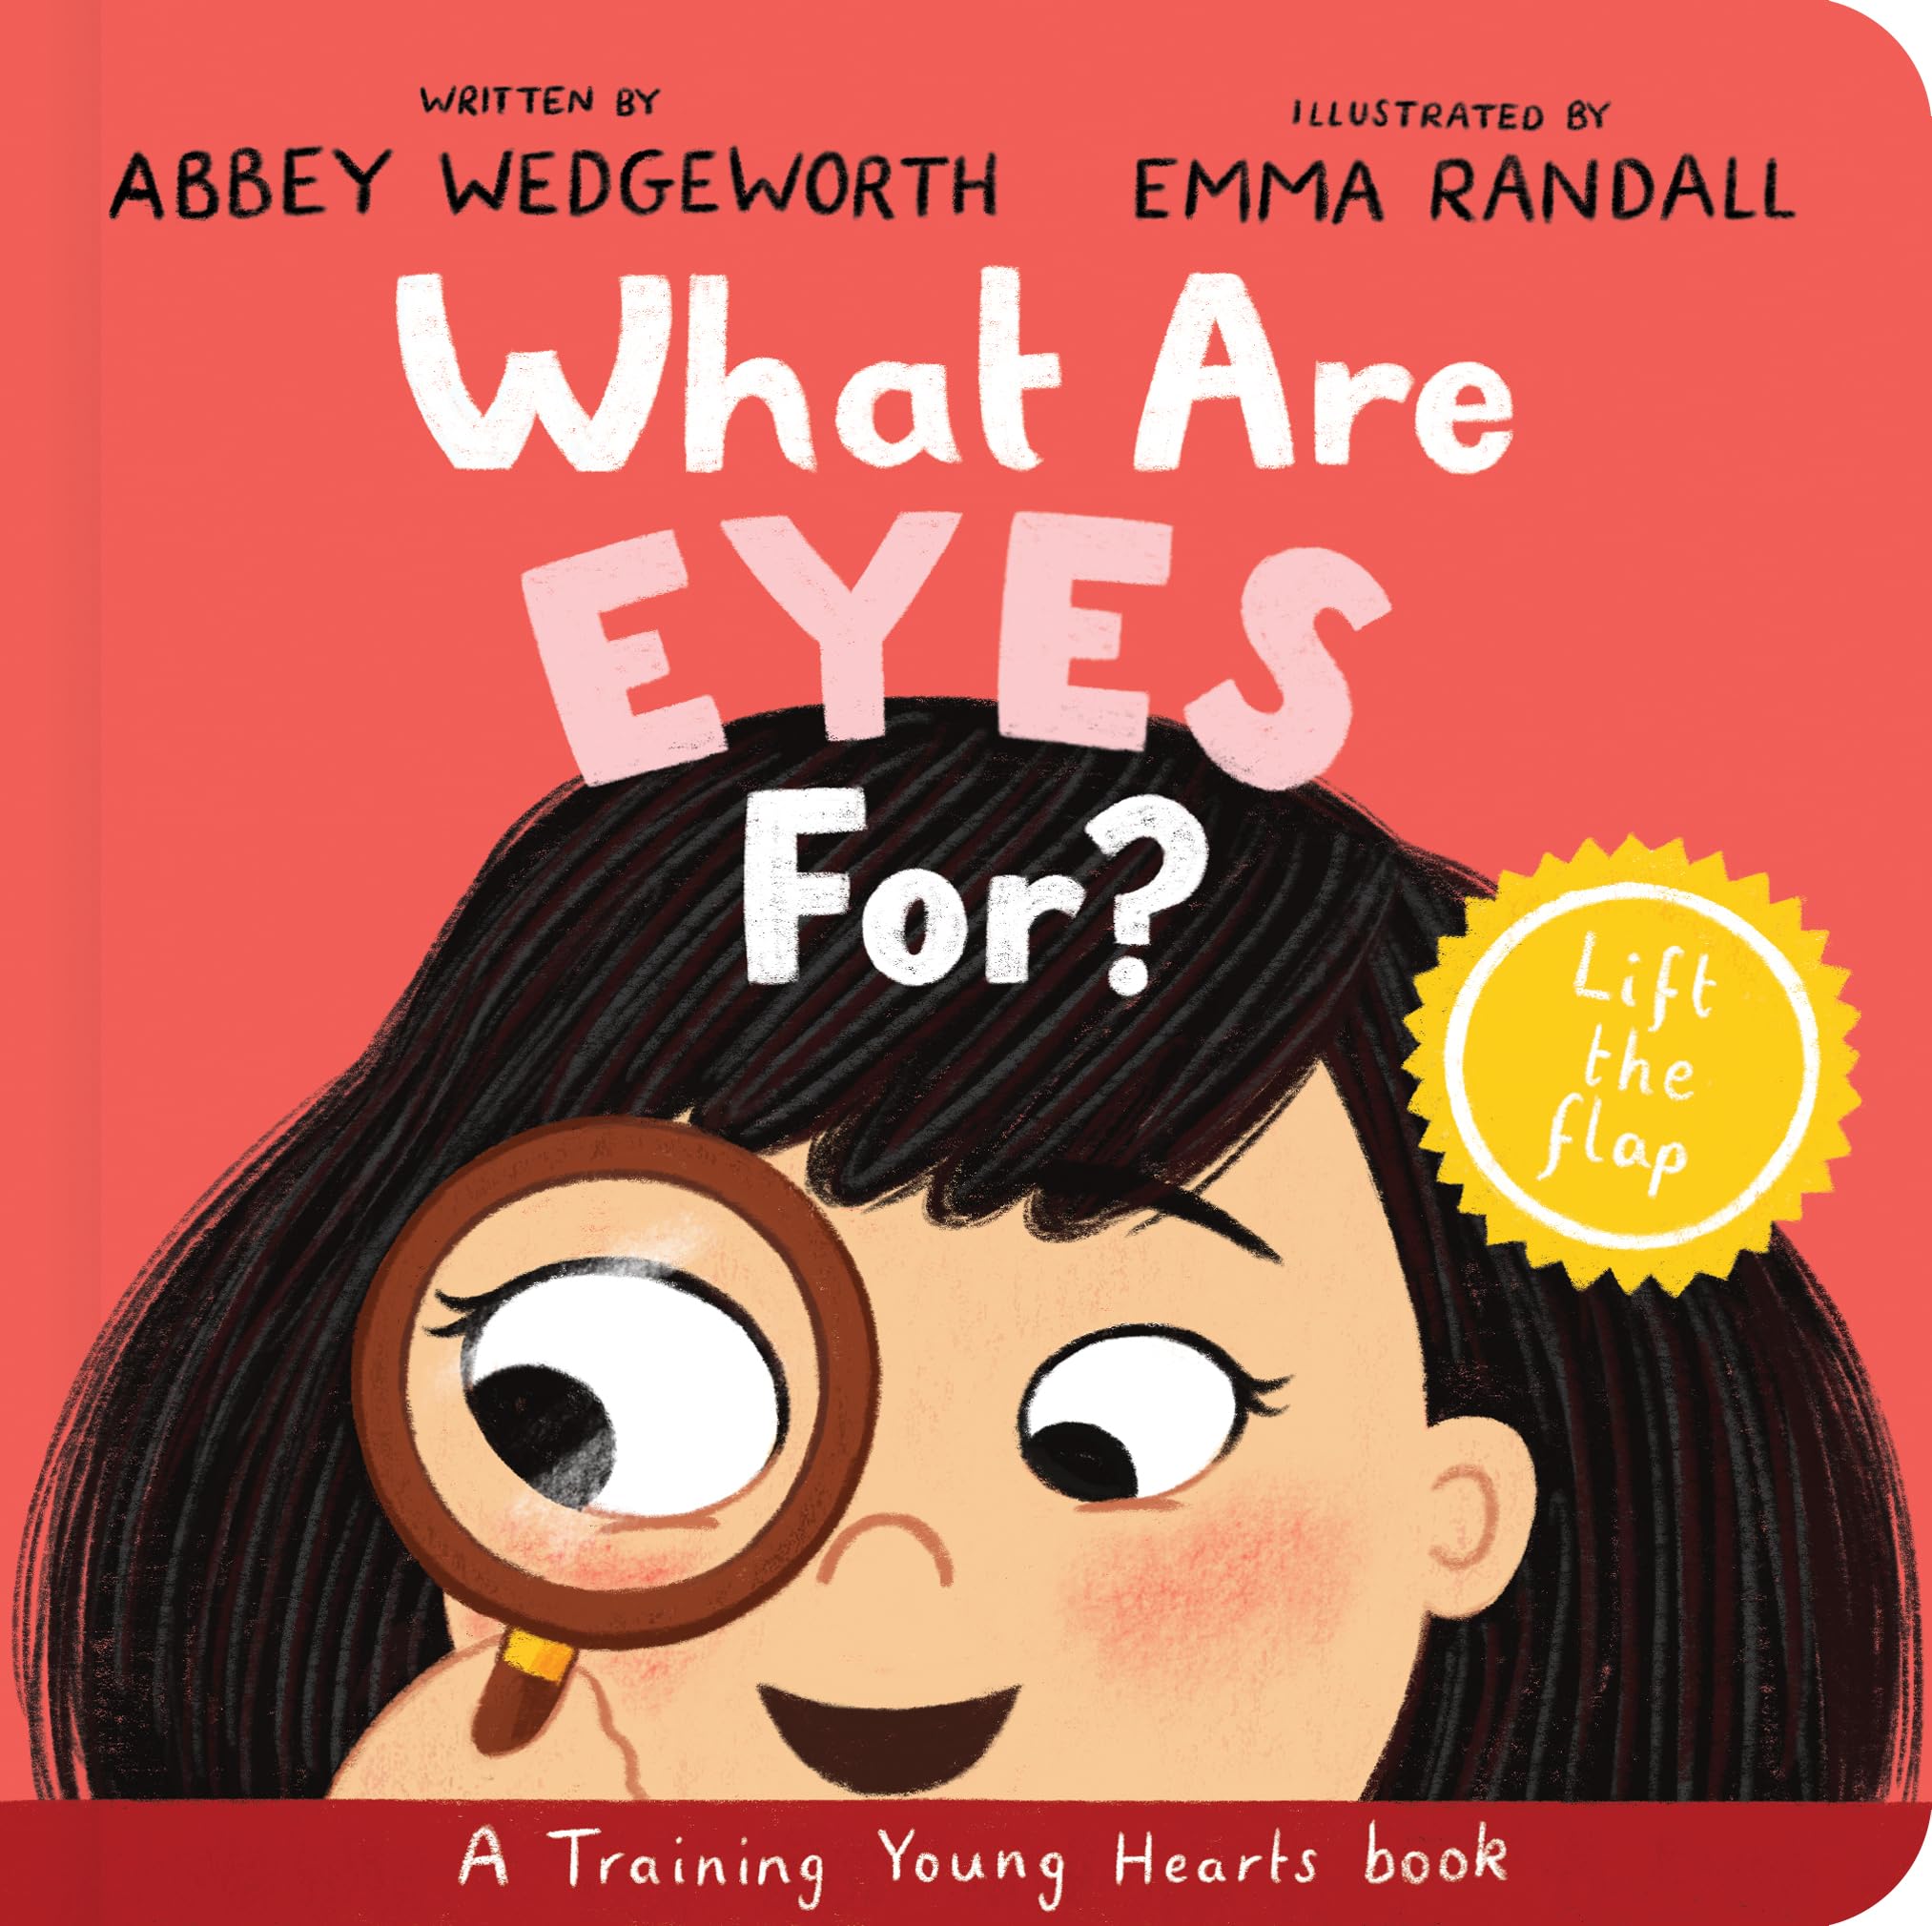 What Are Eyes For? Board Book: A Lift-the-Flap Board Book (Christian behaviour book for toddlers encouraging obedience motivated by God’s grace.) (Training Young Hearts)